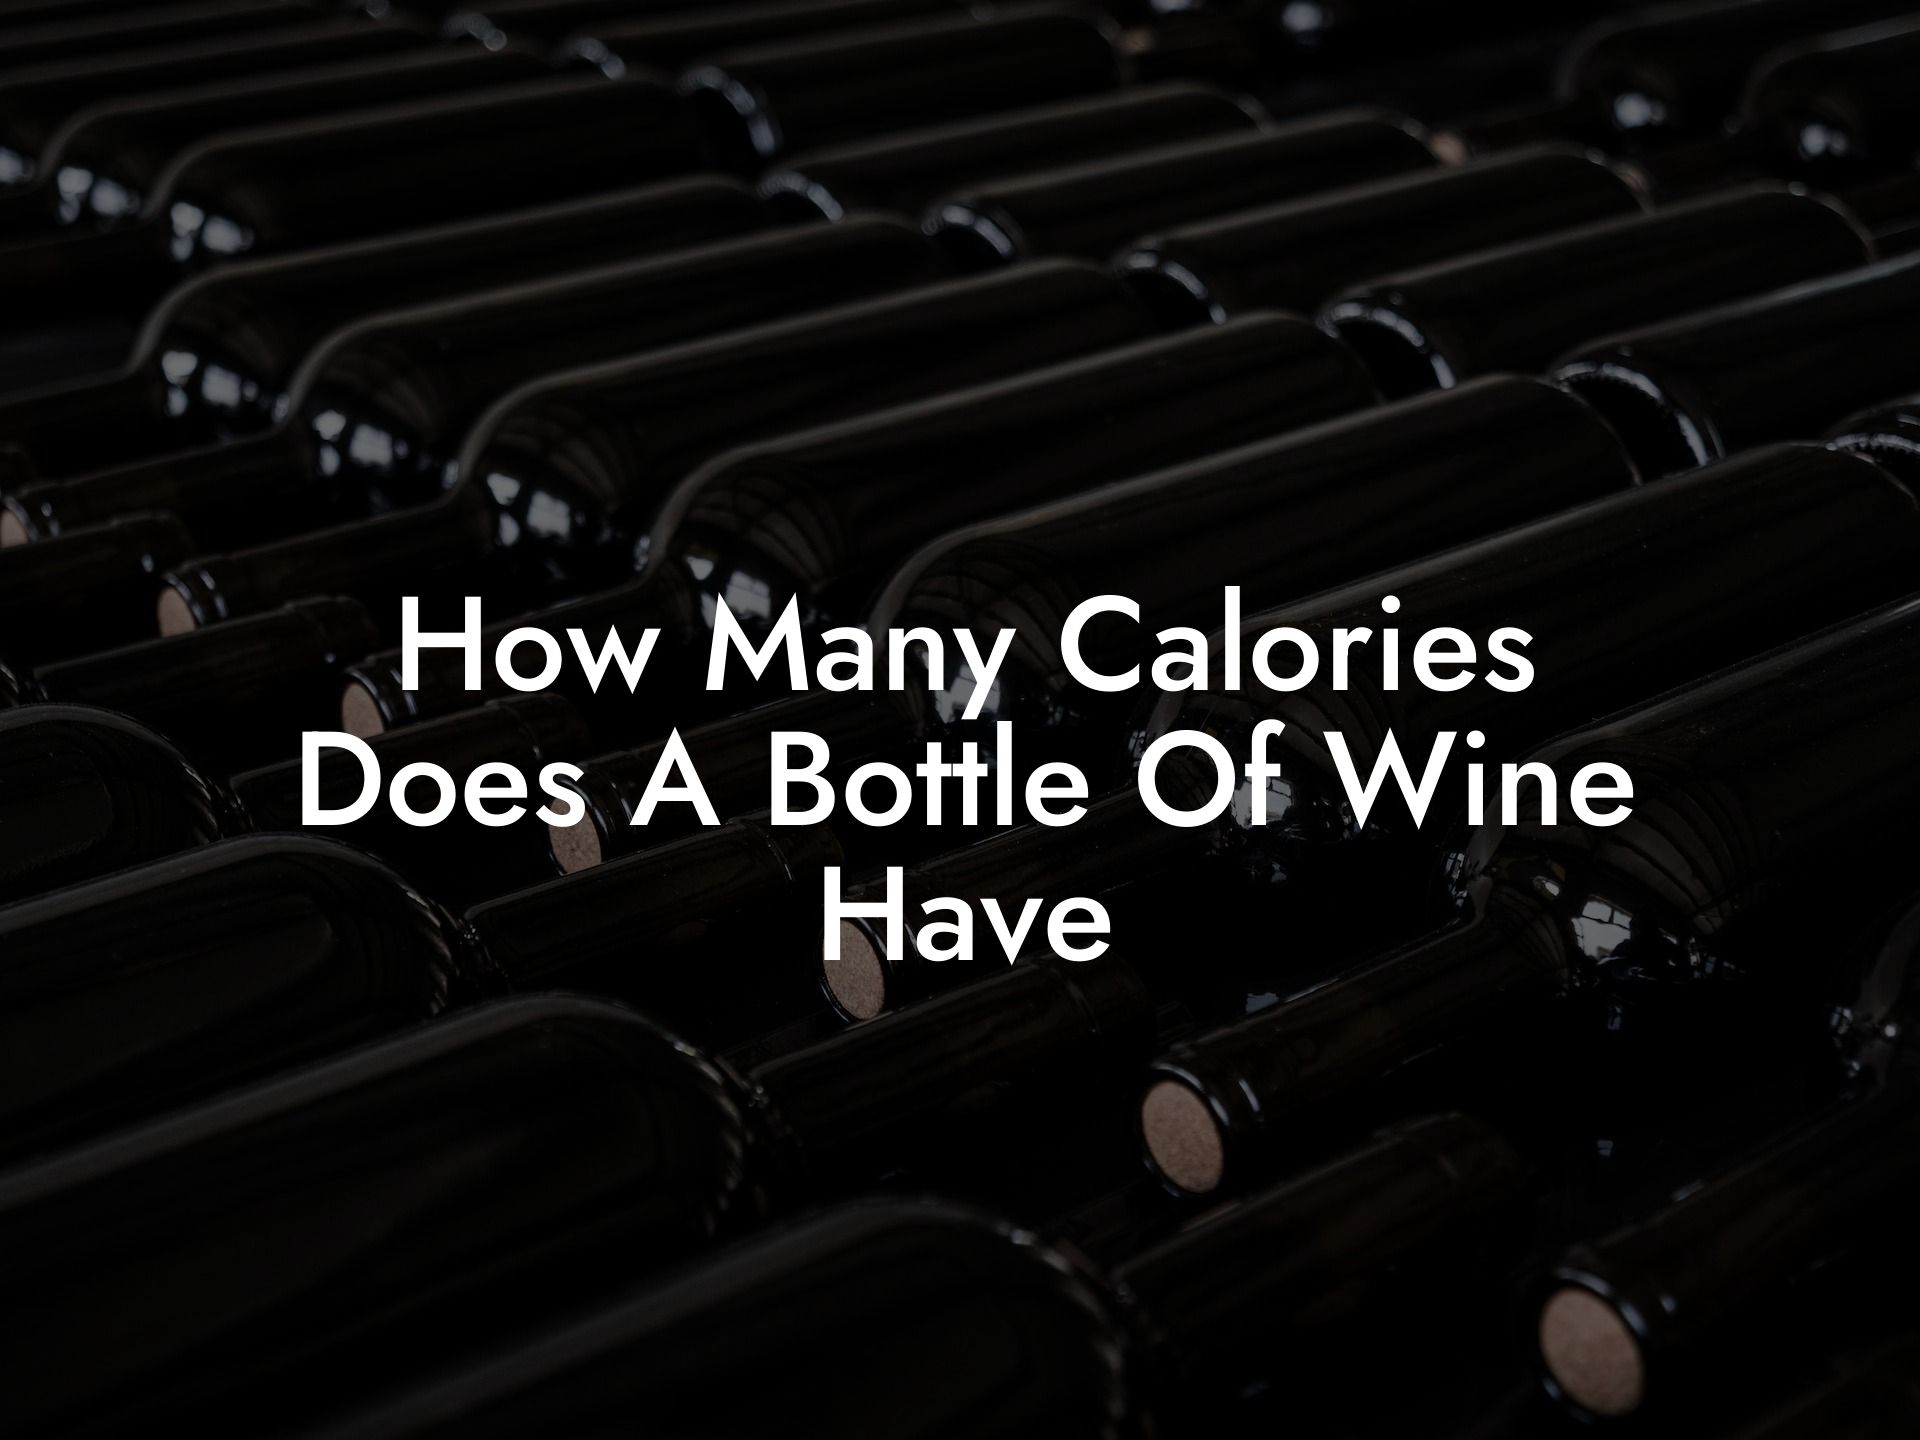 How Many Calories Does A Bottle Of Wine Have